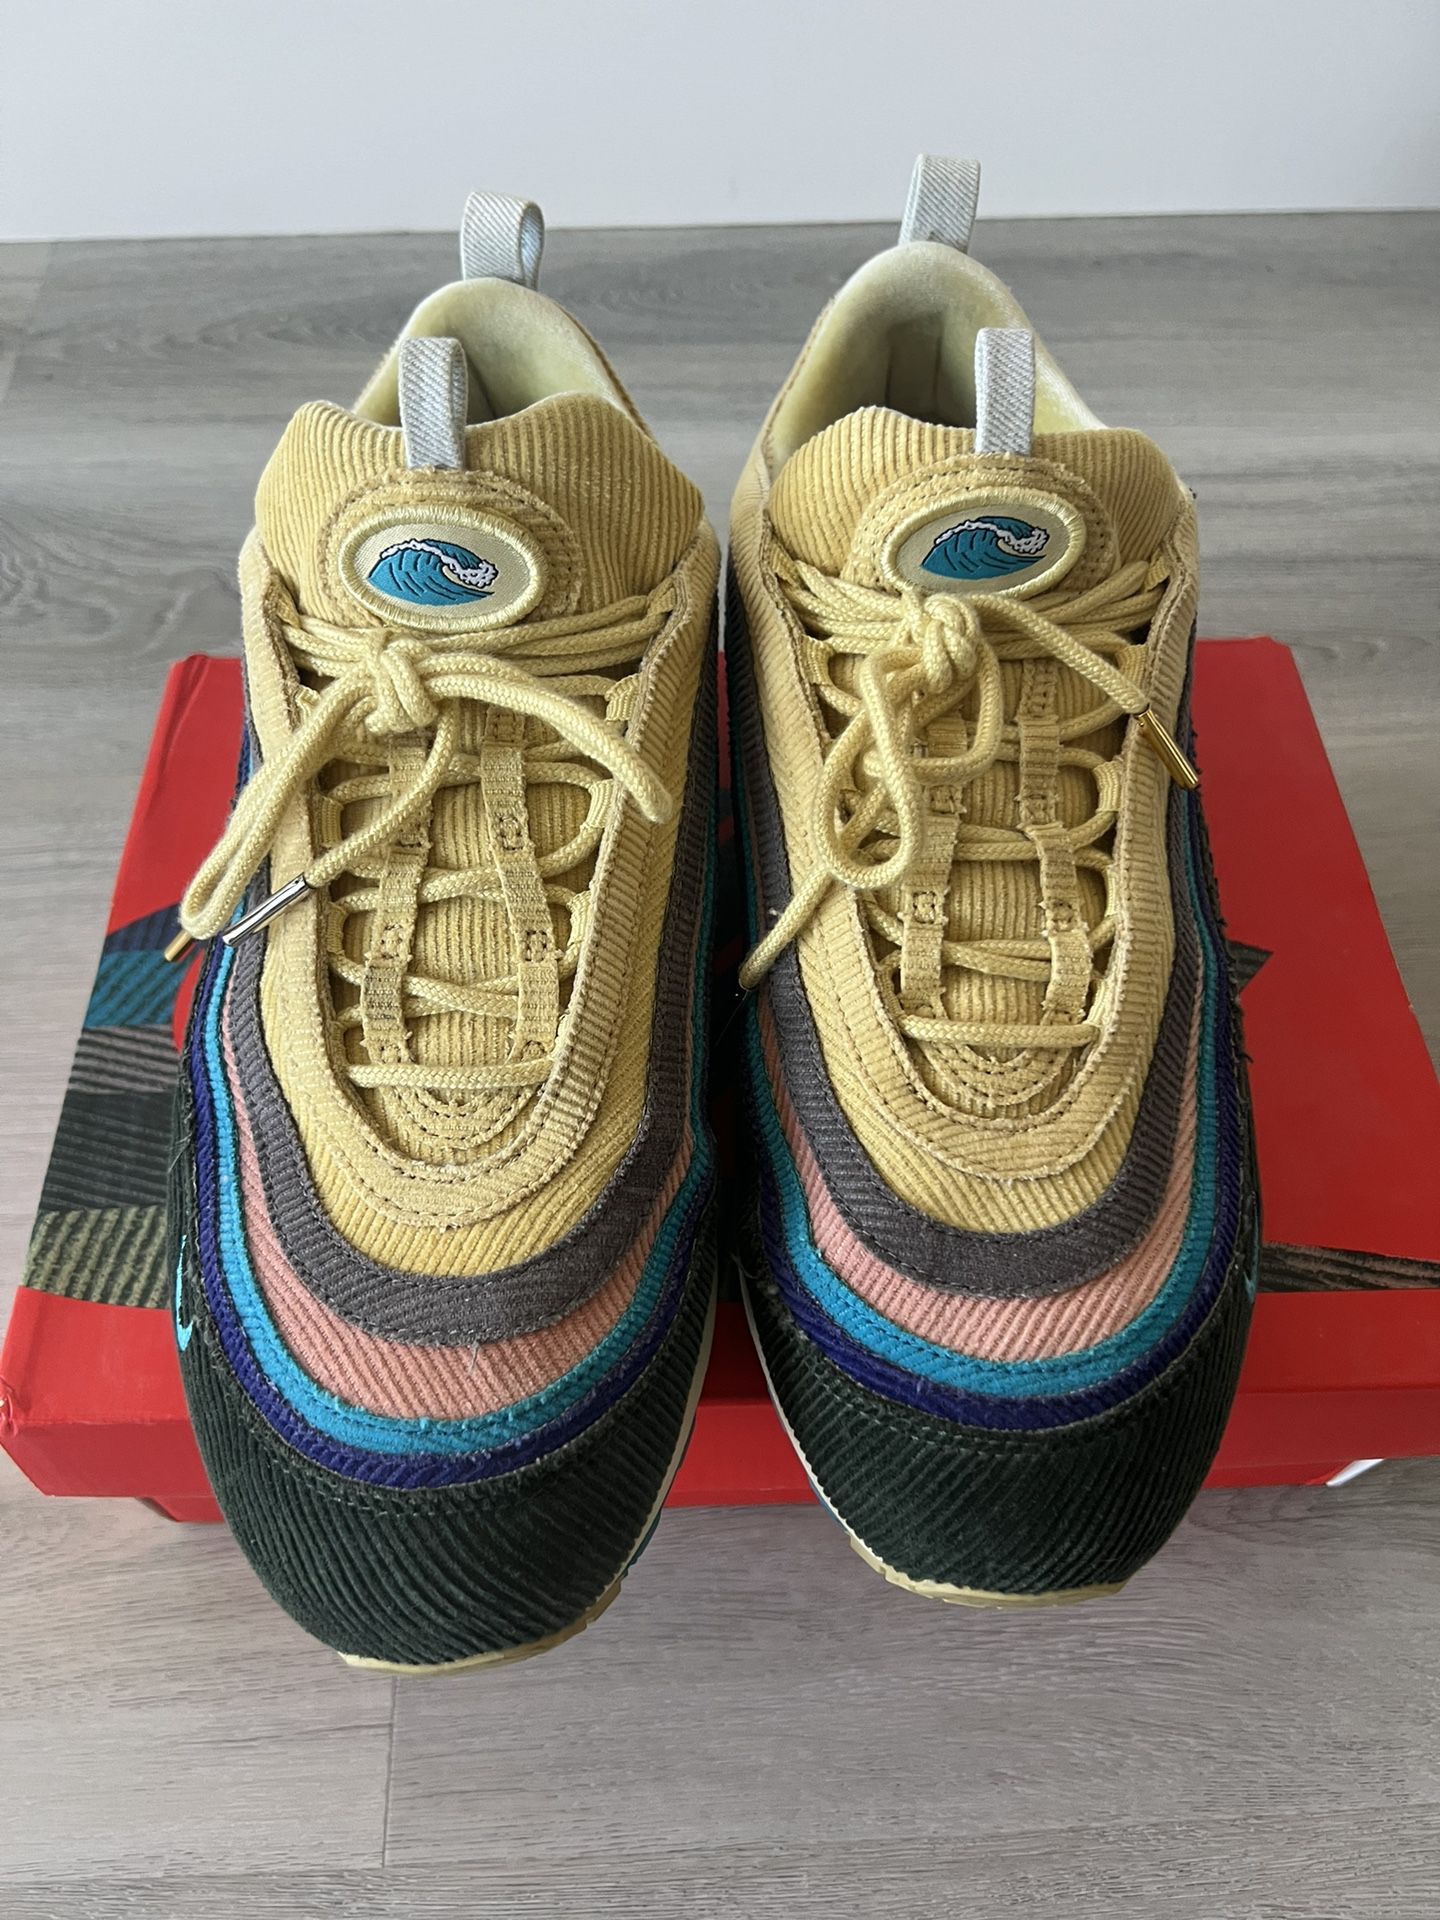 Nike Air 1/97 “Sean Wotherspoon” shoes size 10.5 for in Phoenix, -